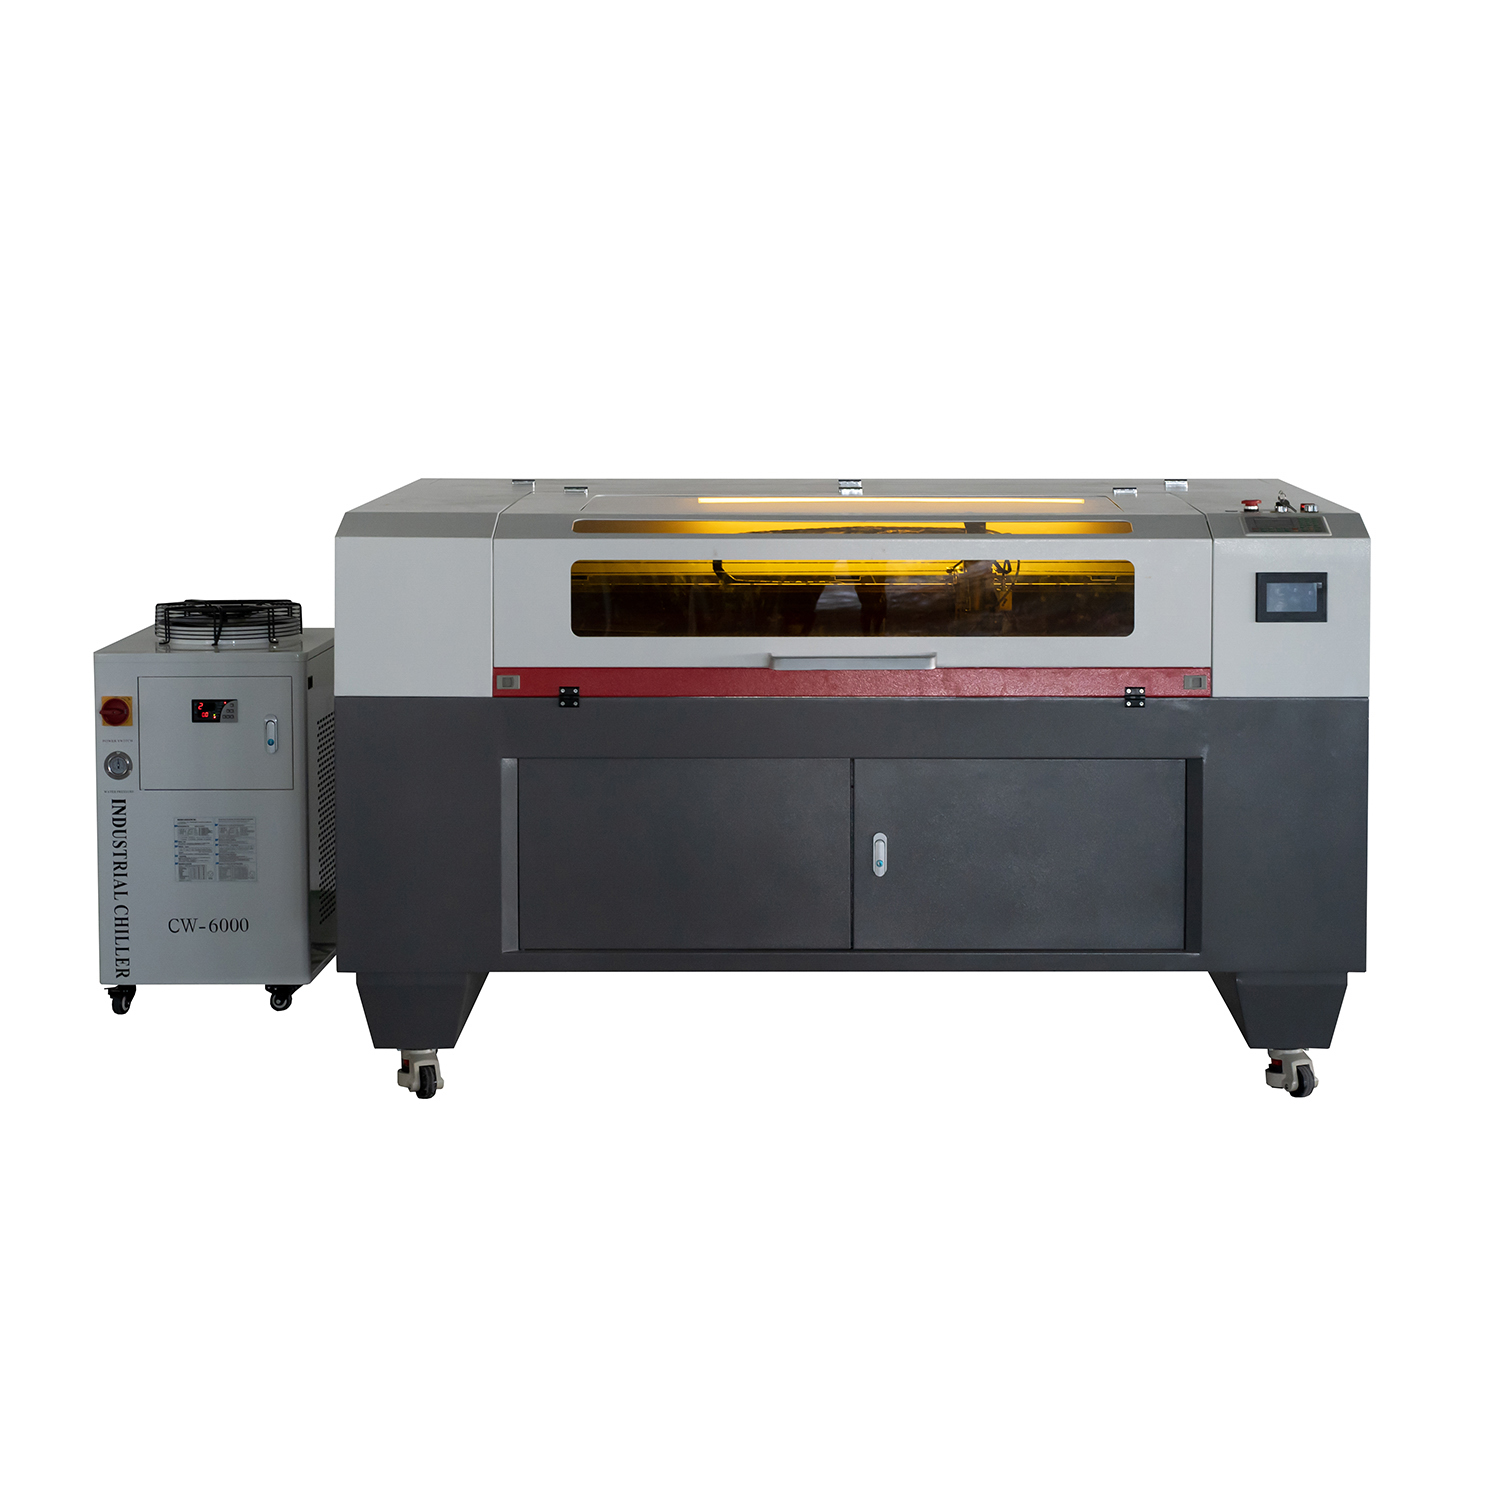 Co2 Mixed Hybrid Metal Cutter Metal And Non Metal Laser Cutting Machine Co2 for Stainless Steel Wood Plywood Acrylic 